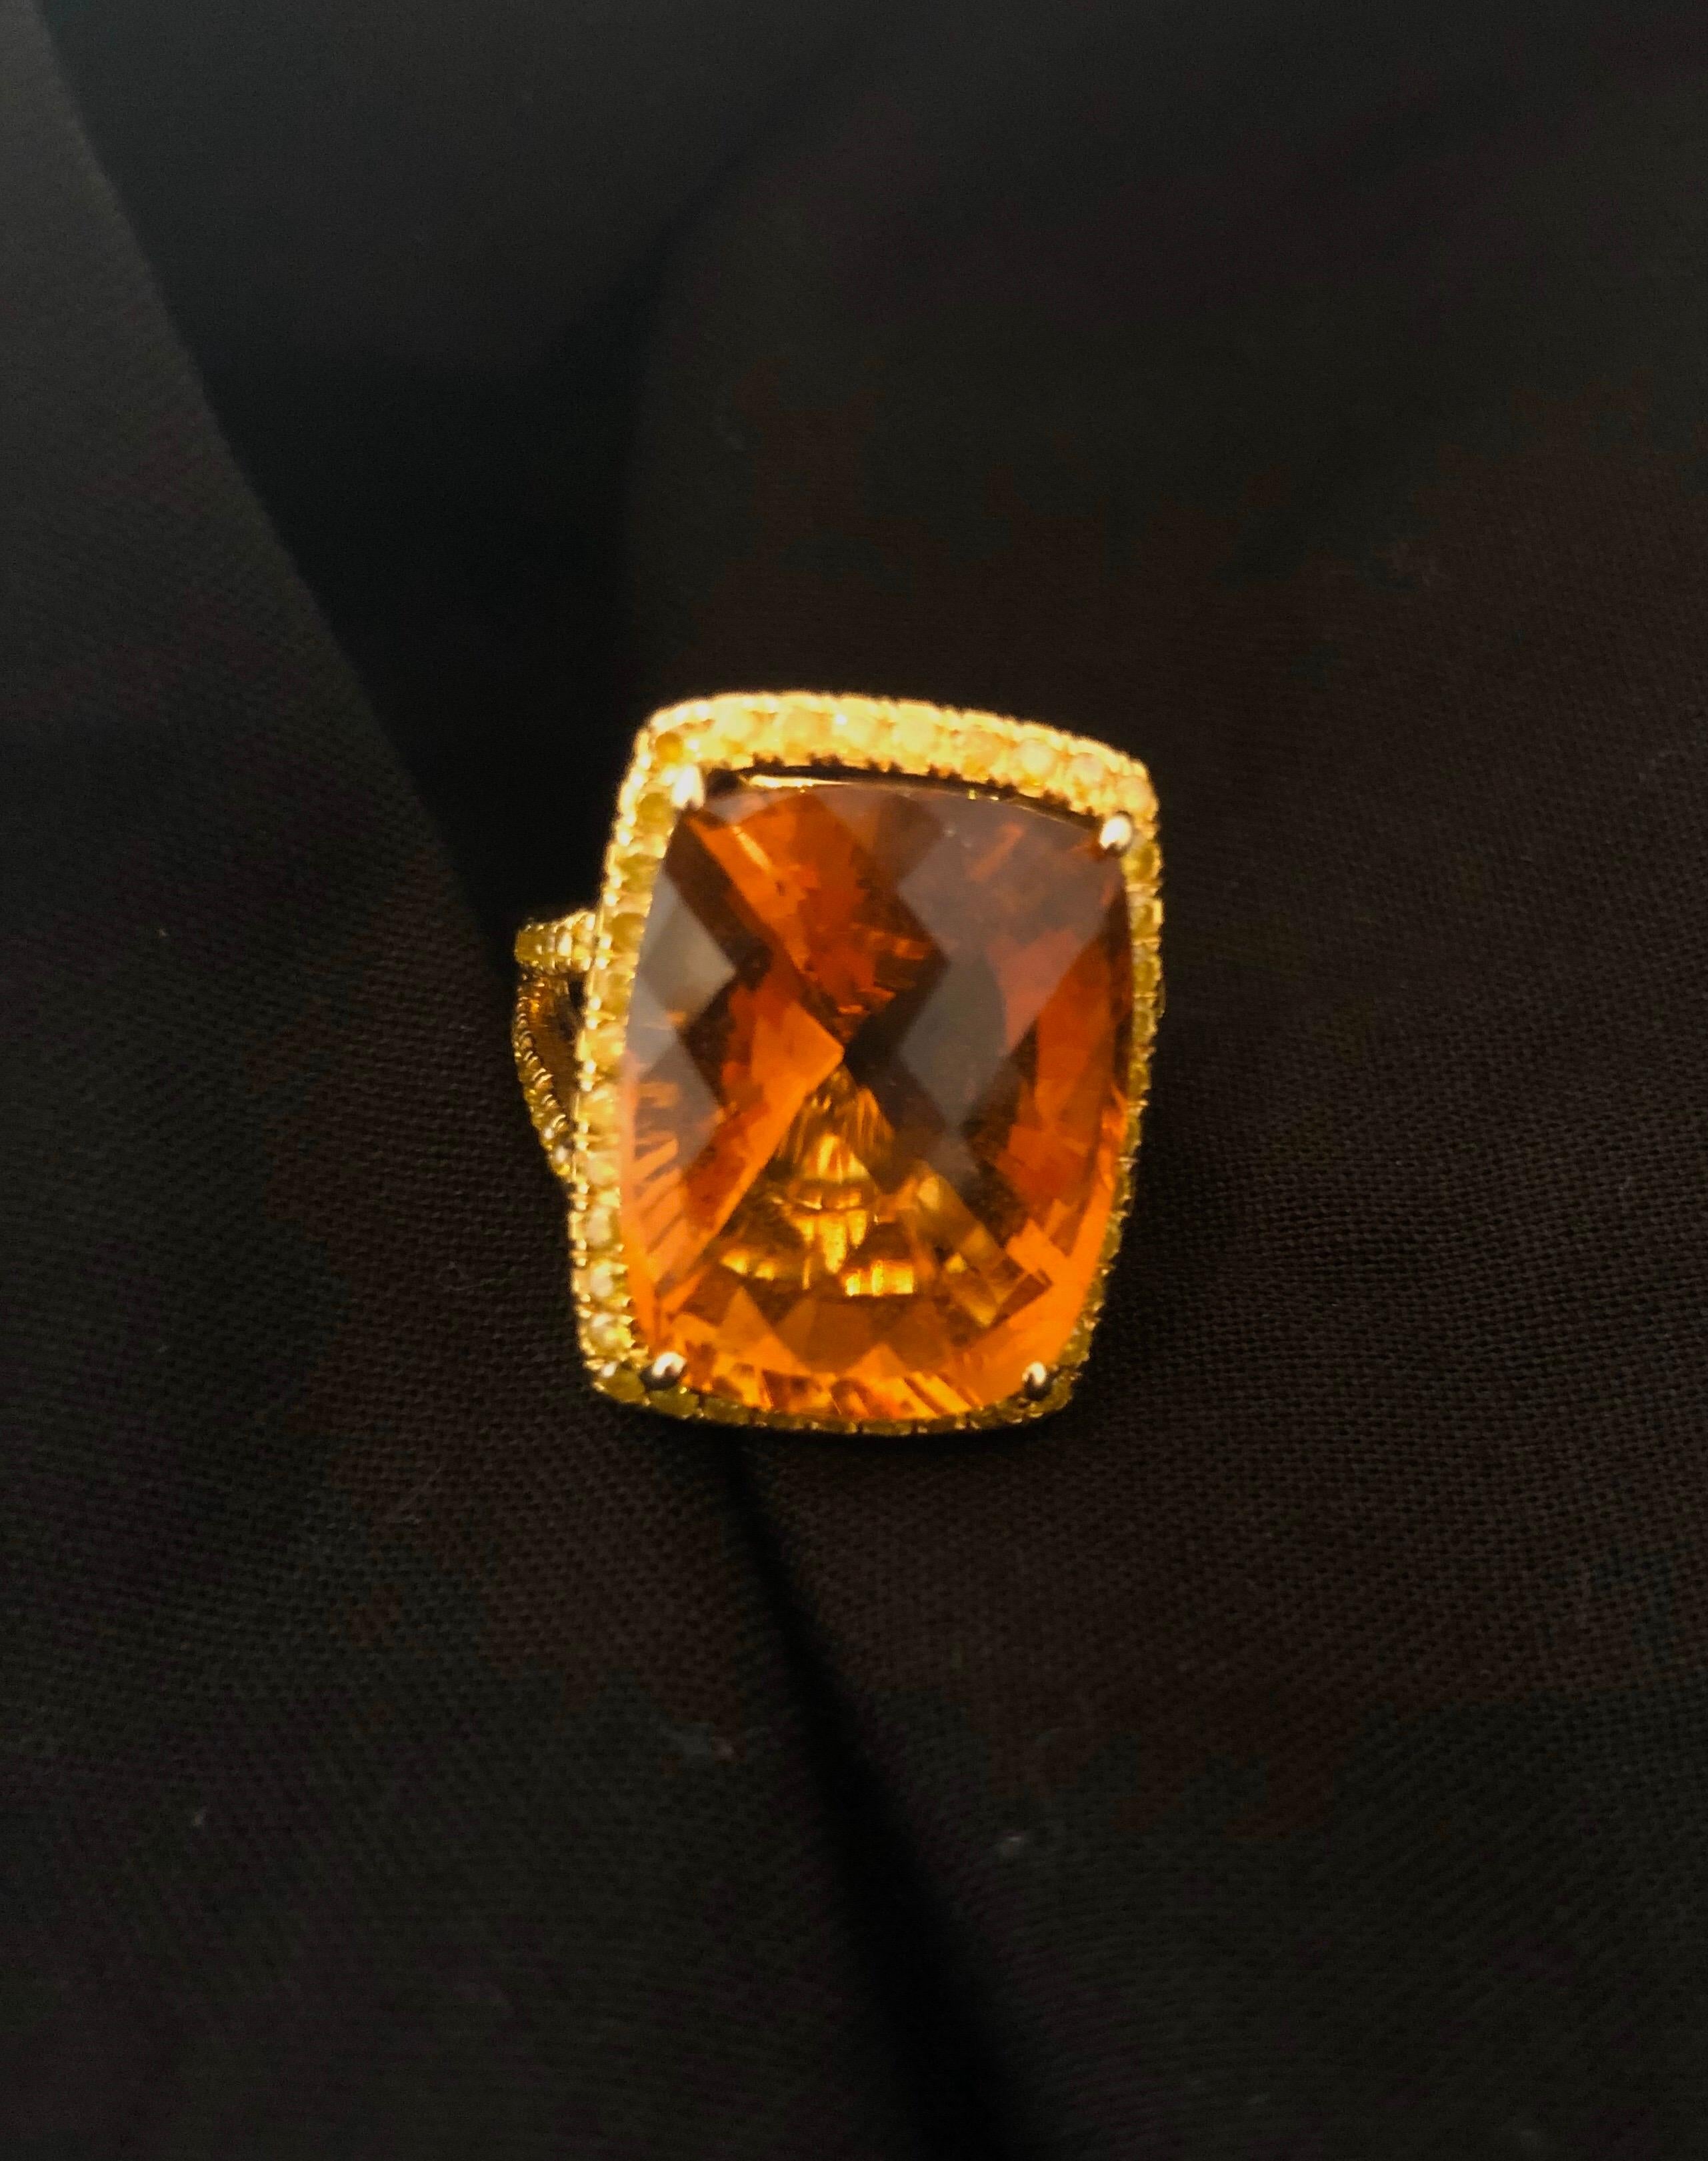 A beautiful ring, centered around a checkerboard, cushion cut, citrine weighing approximately 12ct. Crafted in 18K yellow gold, in a 